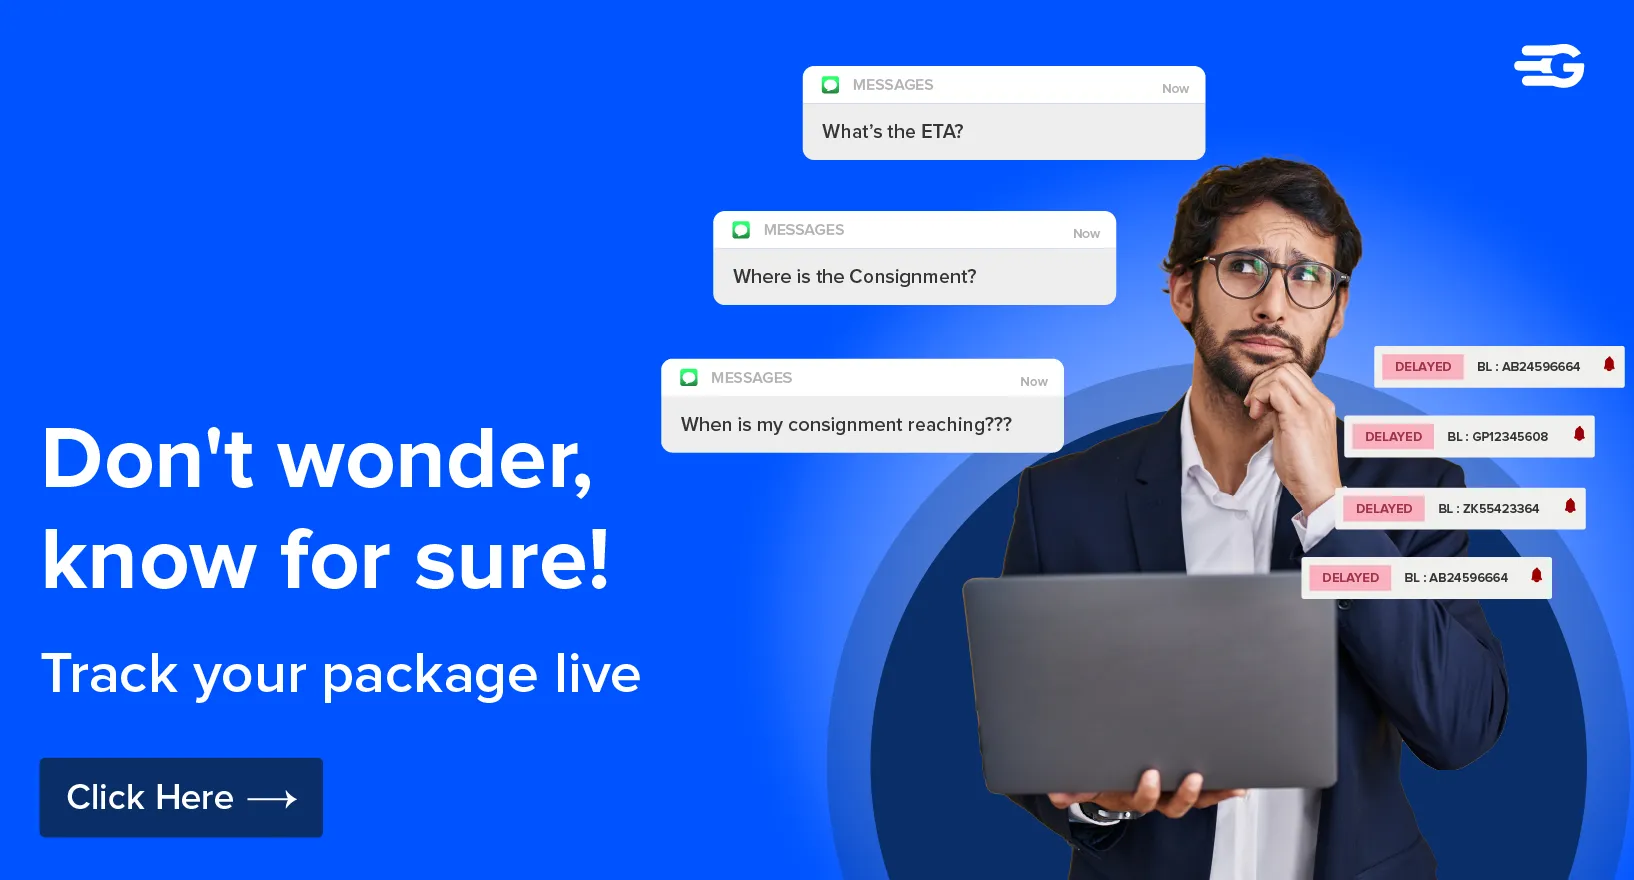 Don't wonder, know for sure!
Track your package live!